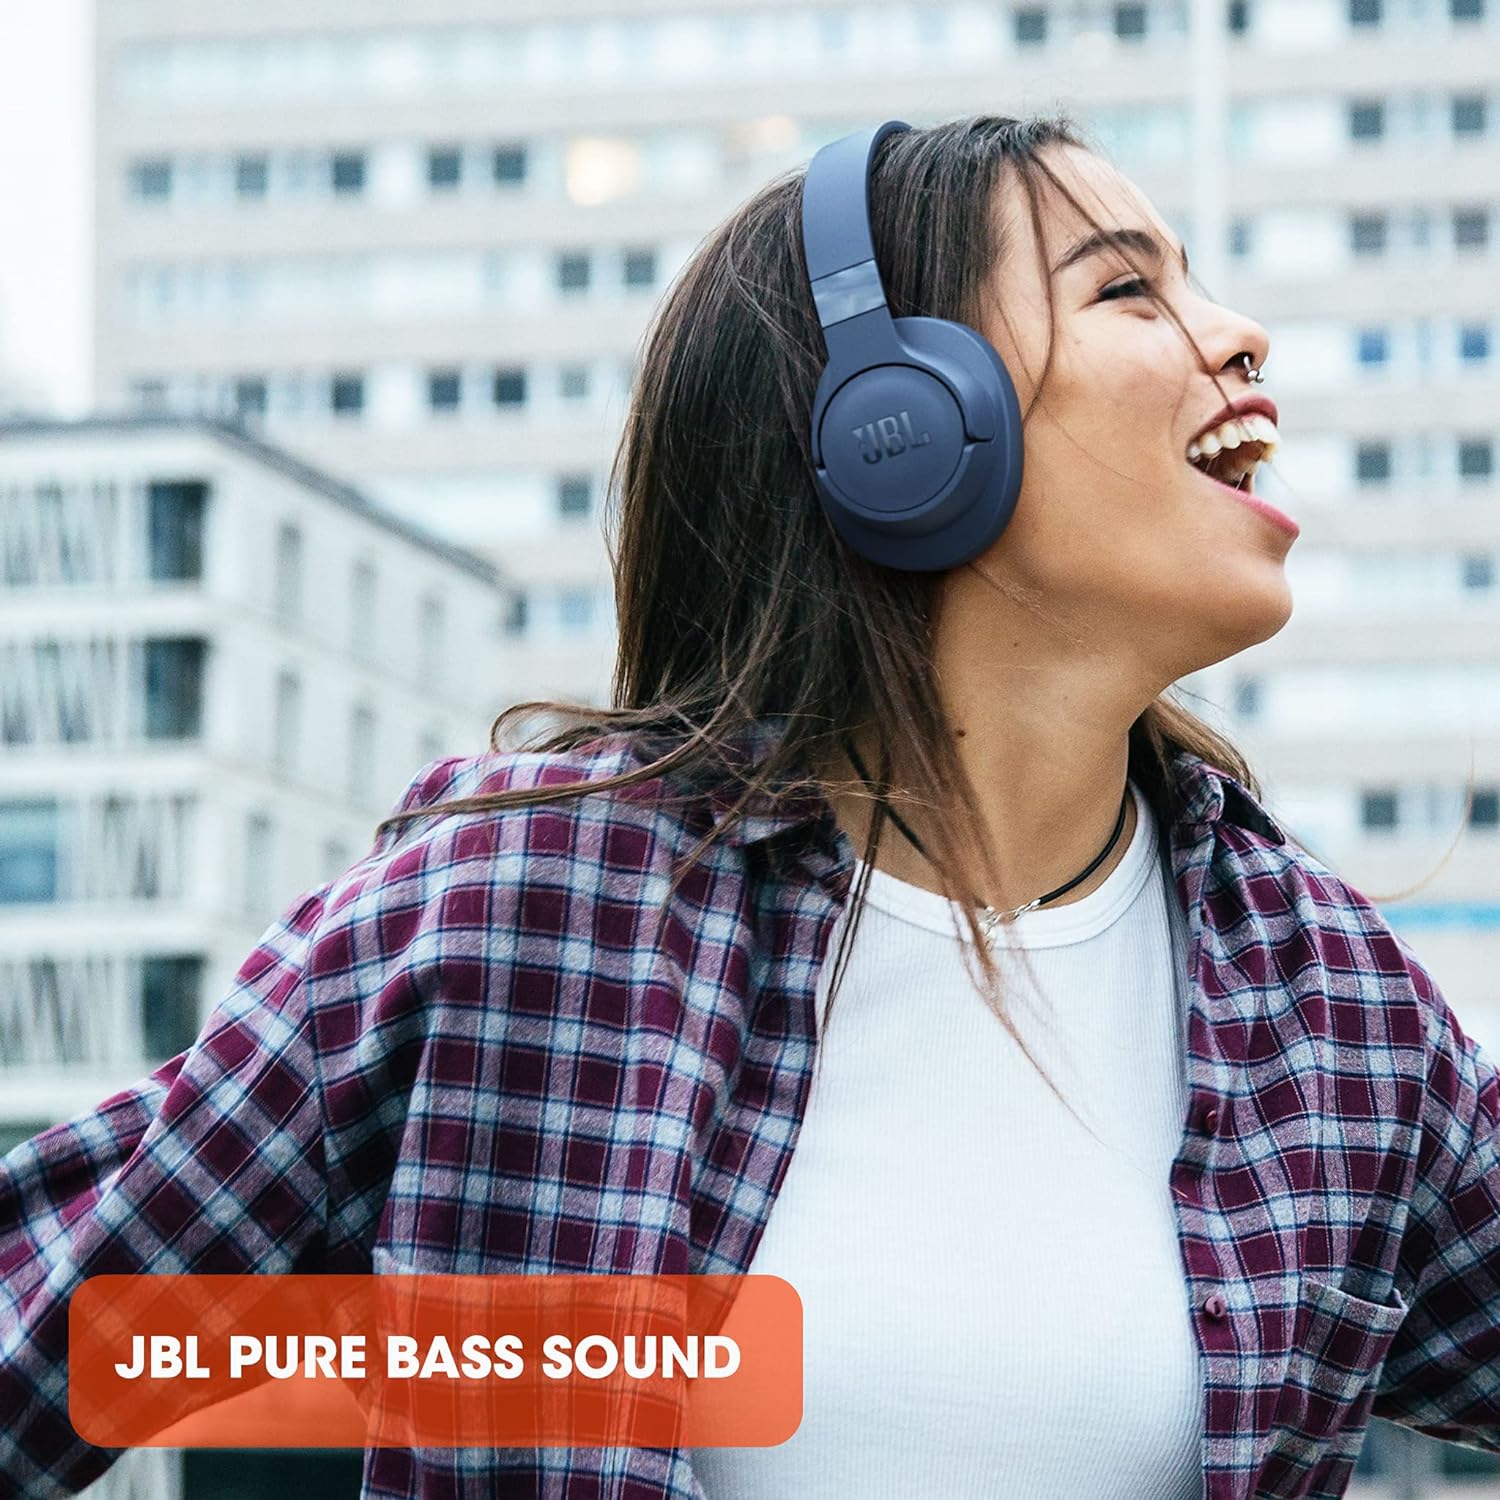 JBL Tune 710BT Wireless Over-Ear Headphones, Deep Powerful Bass, 50H Battery, Hands Free Call, Voice Assistant, Multi Point Connection, Lightweight Foldable, Detachable Cable - White, JBLT710BTWHT